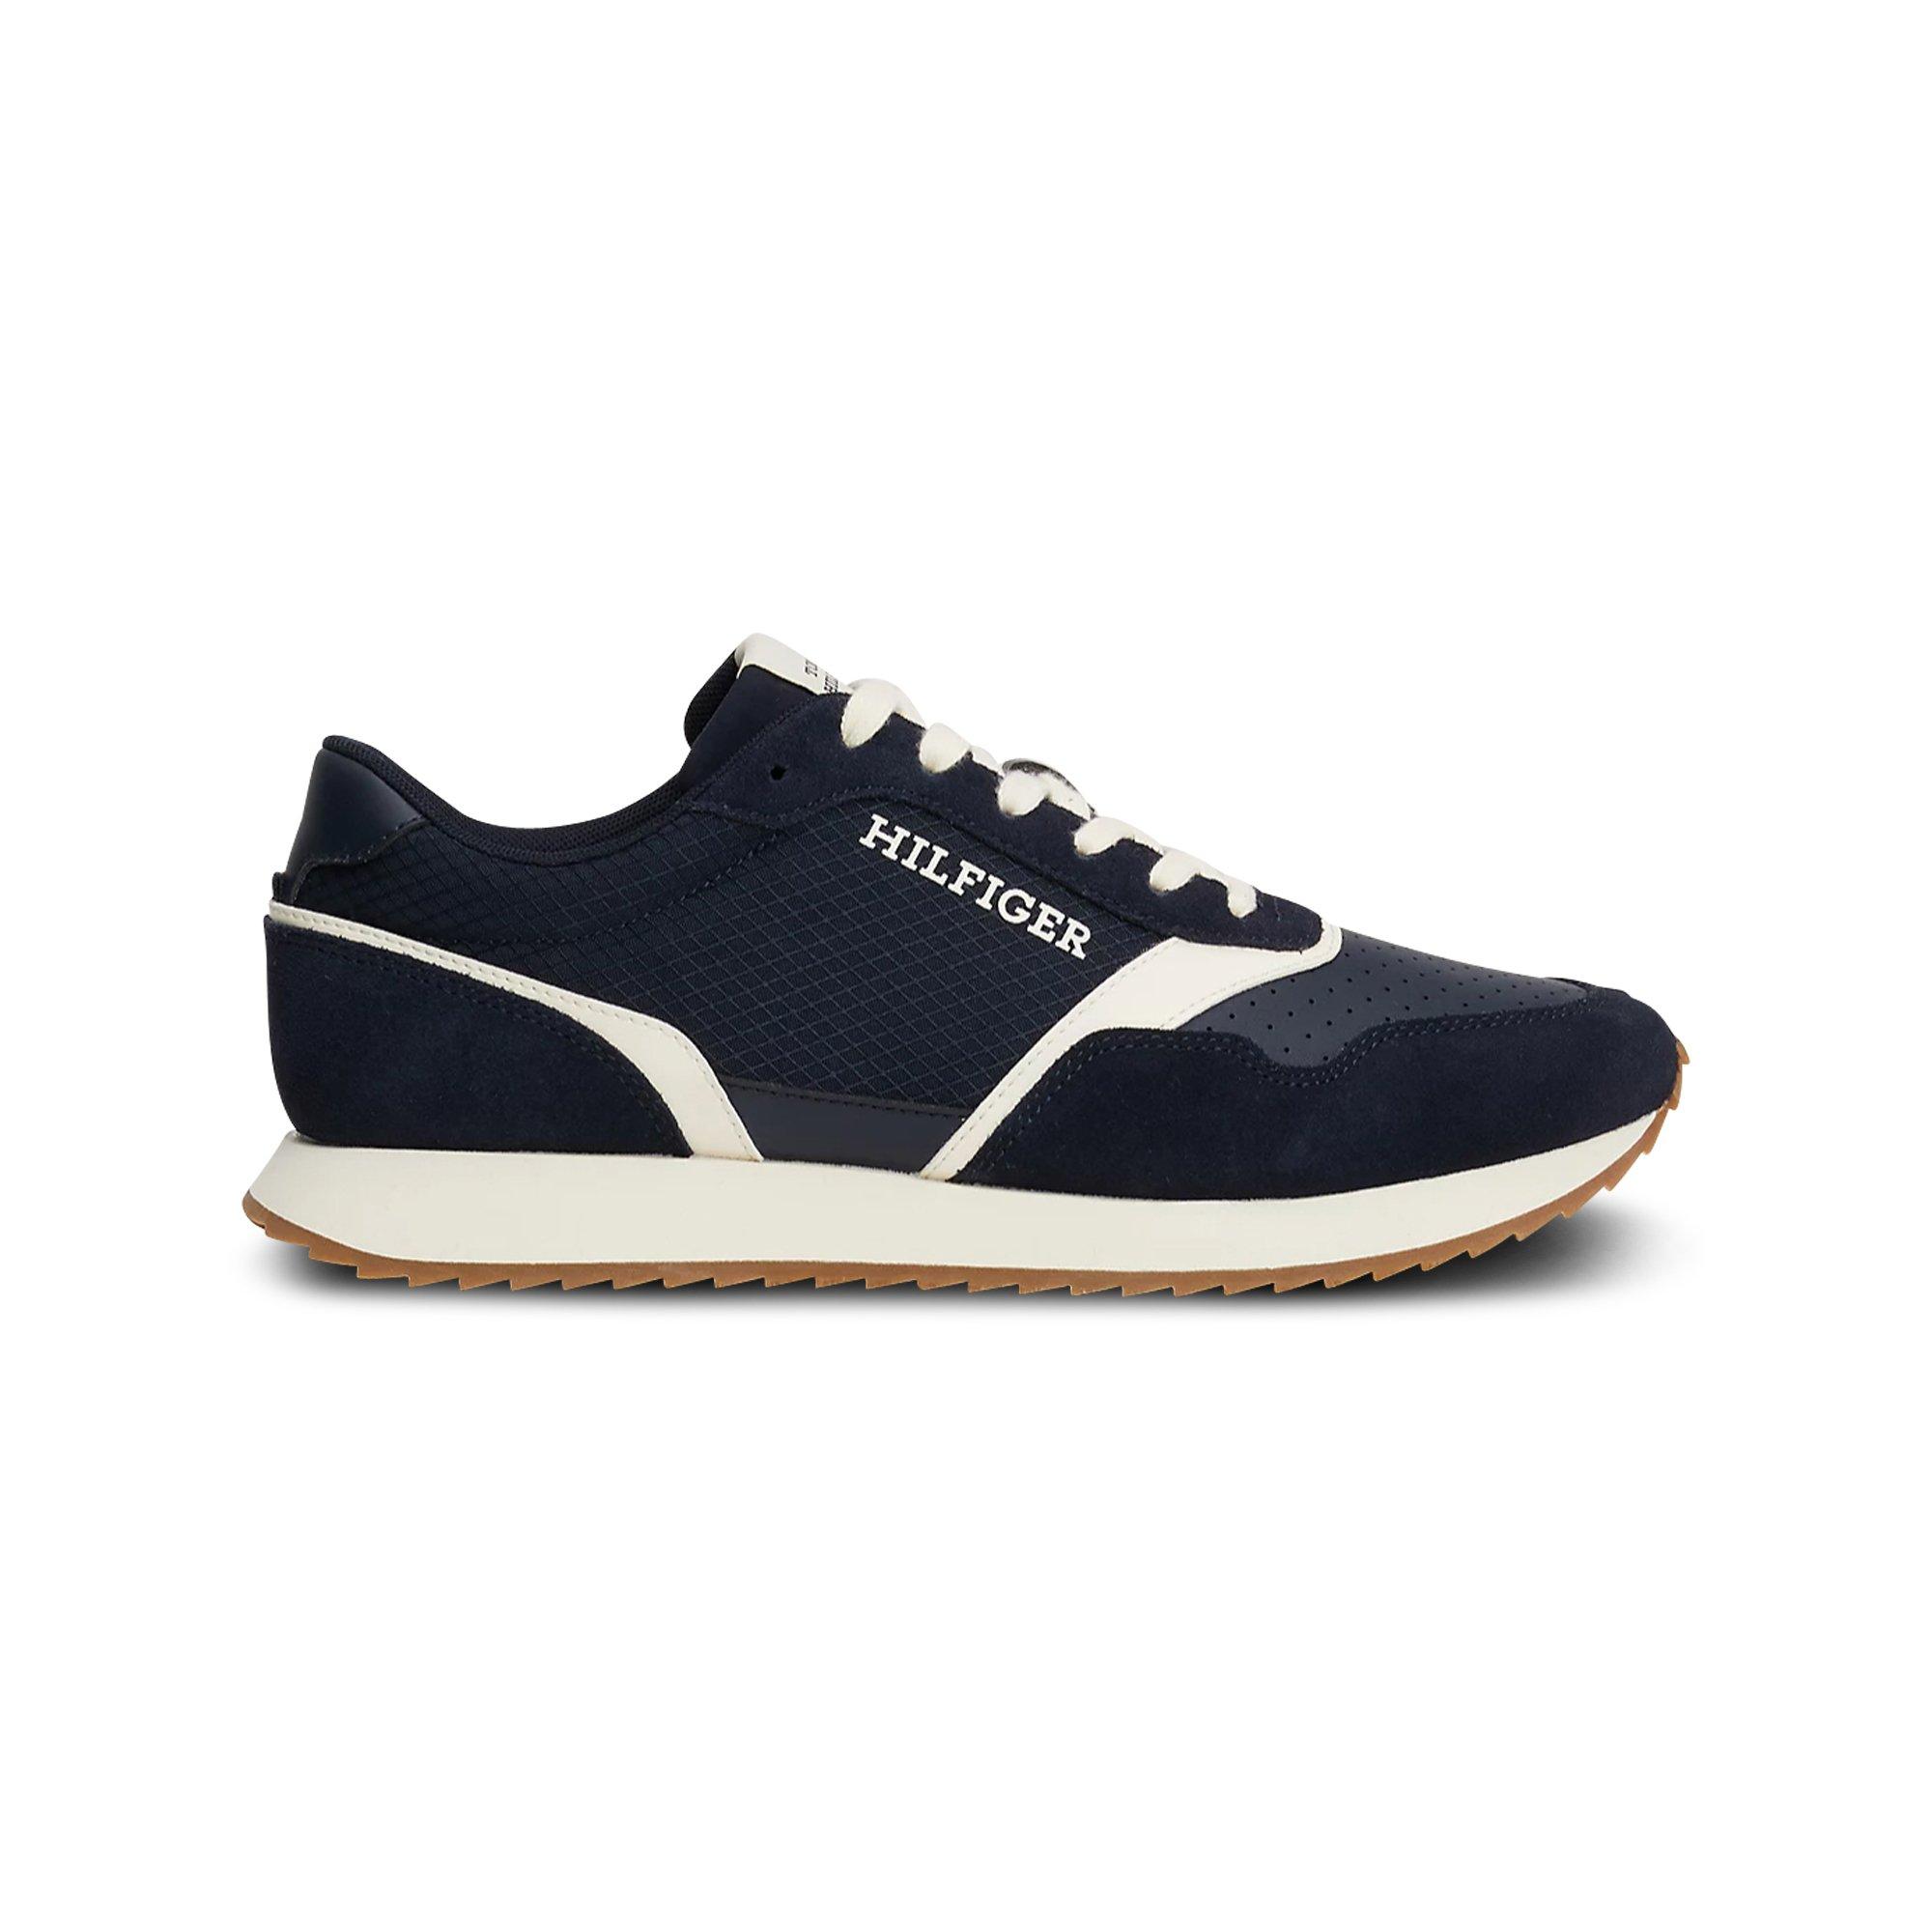 TOMMY HILFIGER RUNNER EVO COLORMA MIX Sneakers, basses 